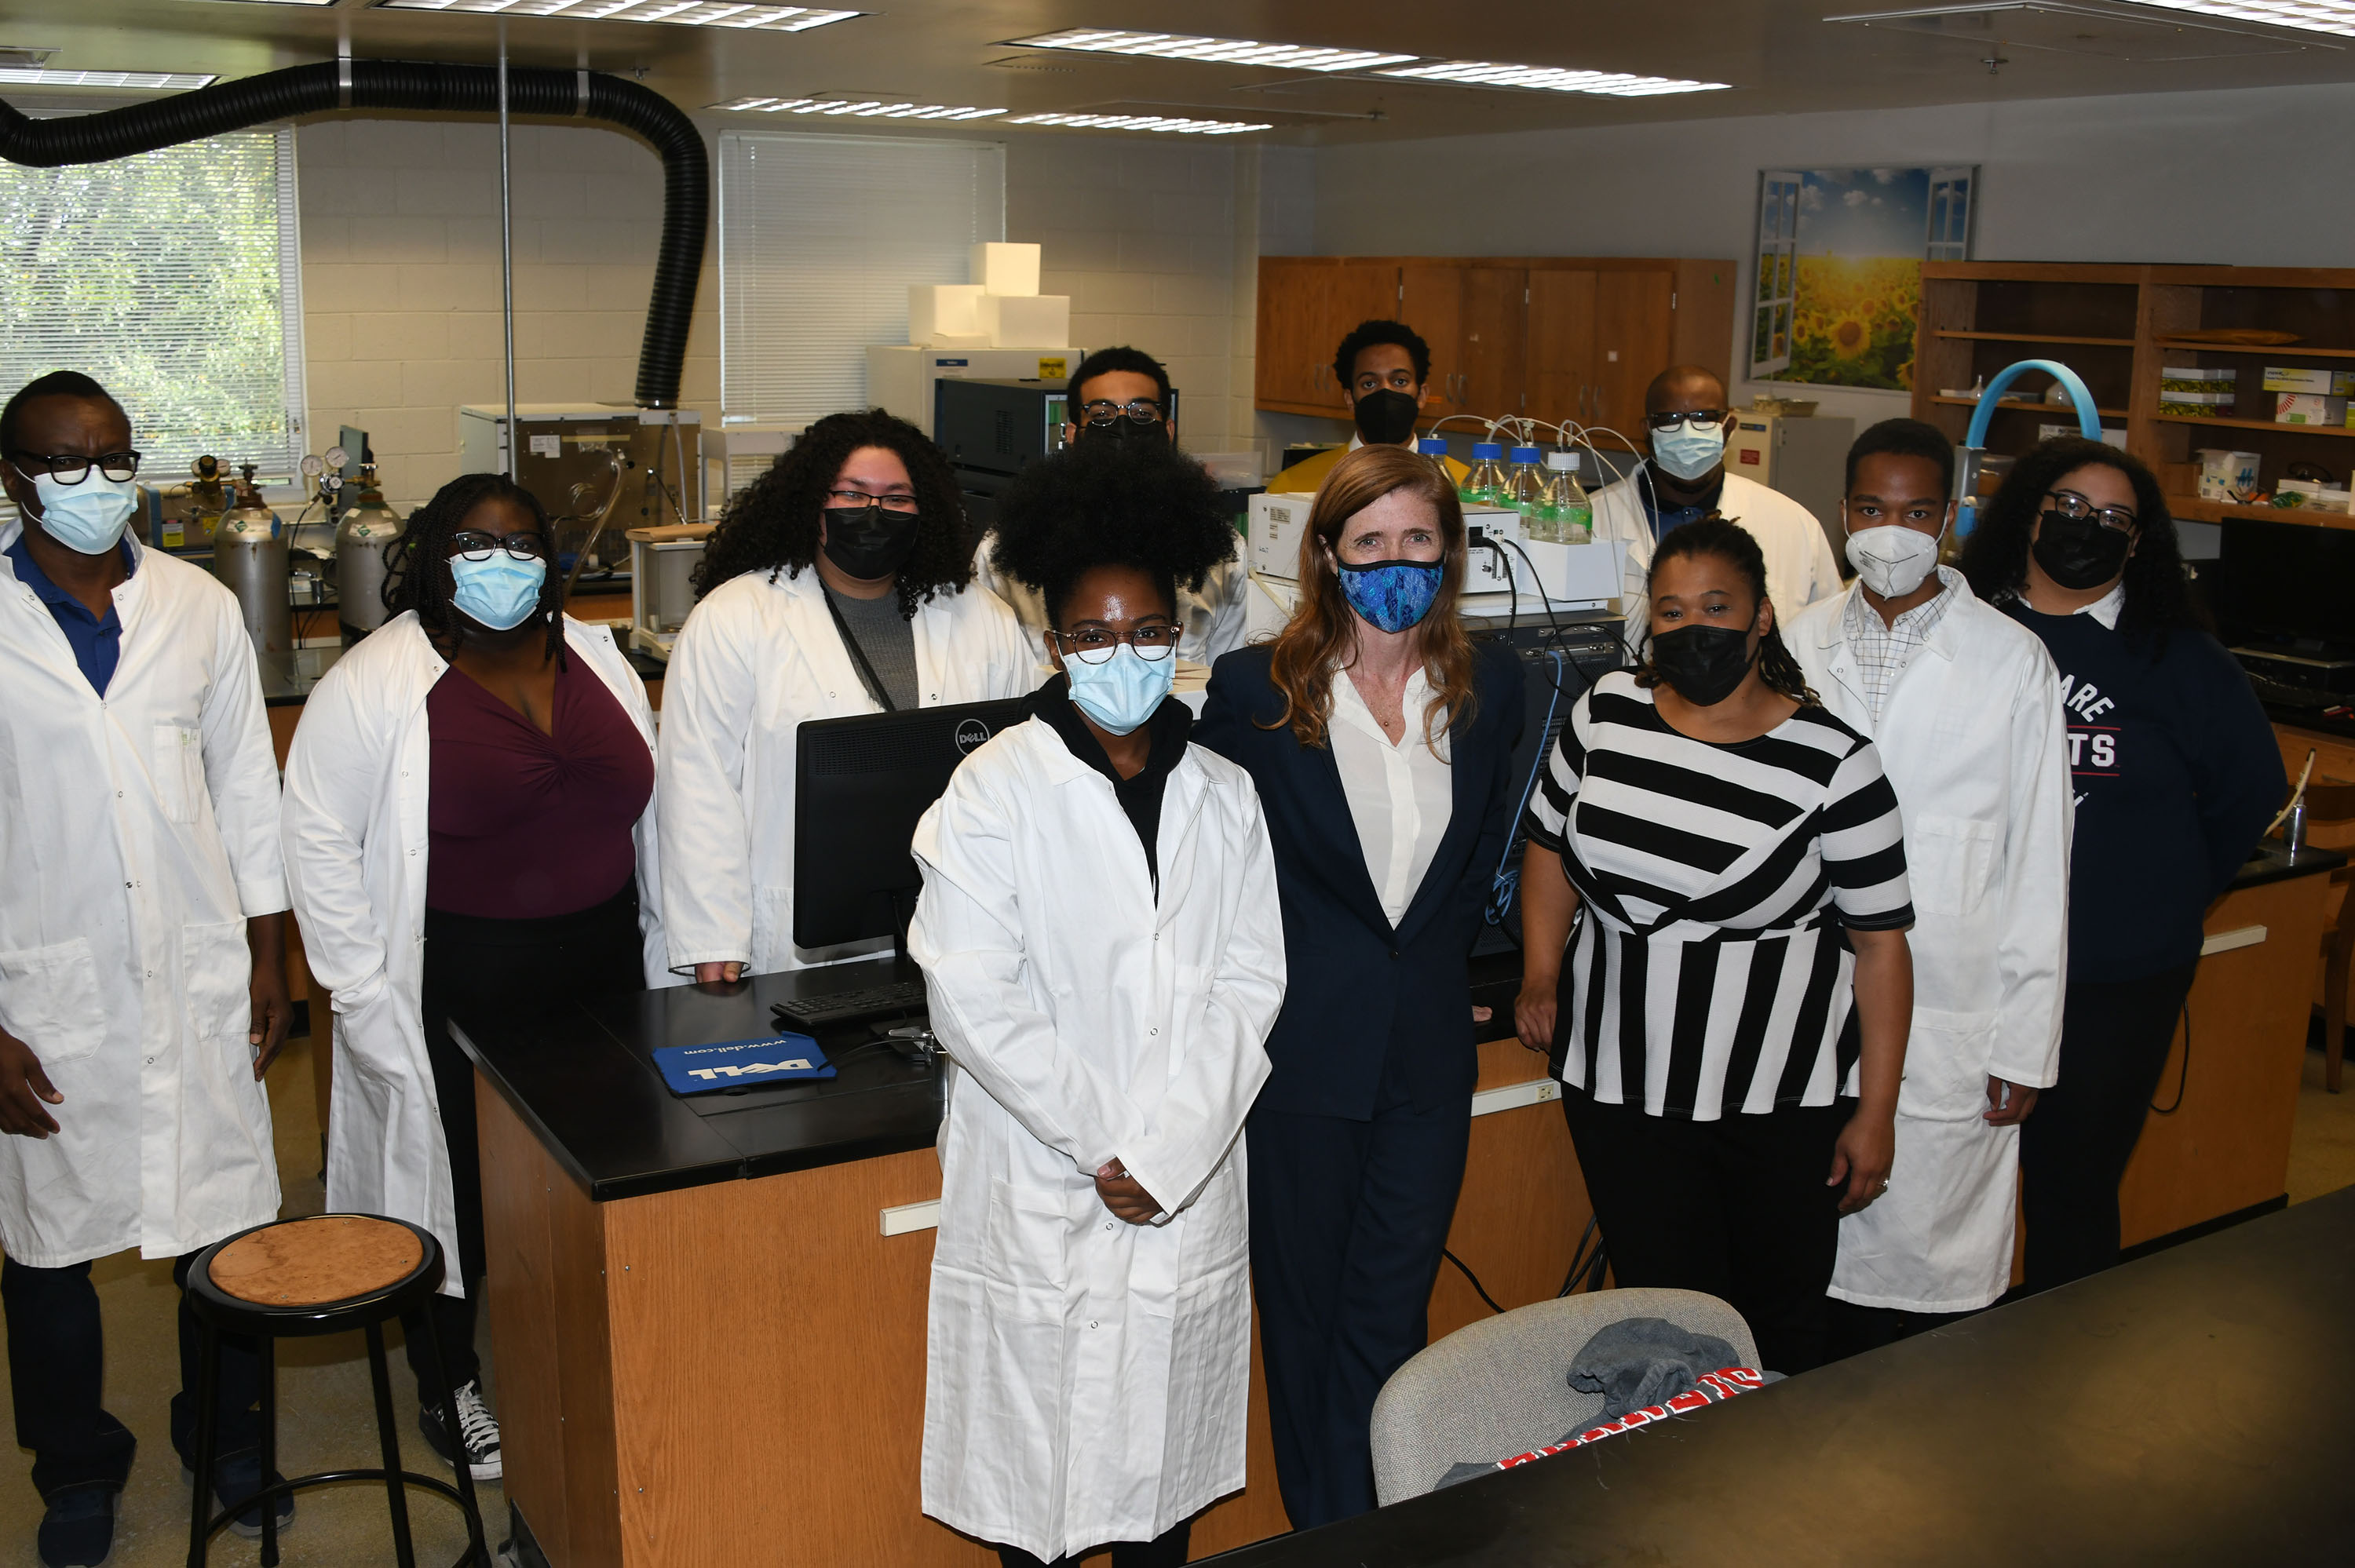 Samantha Power (in front) stopped by the Water Analysis Lab and met chemistry students.